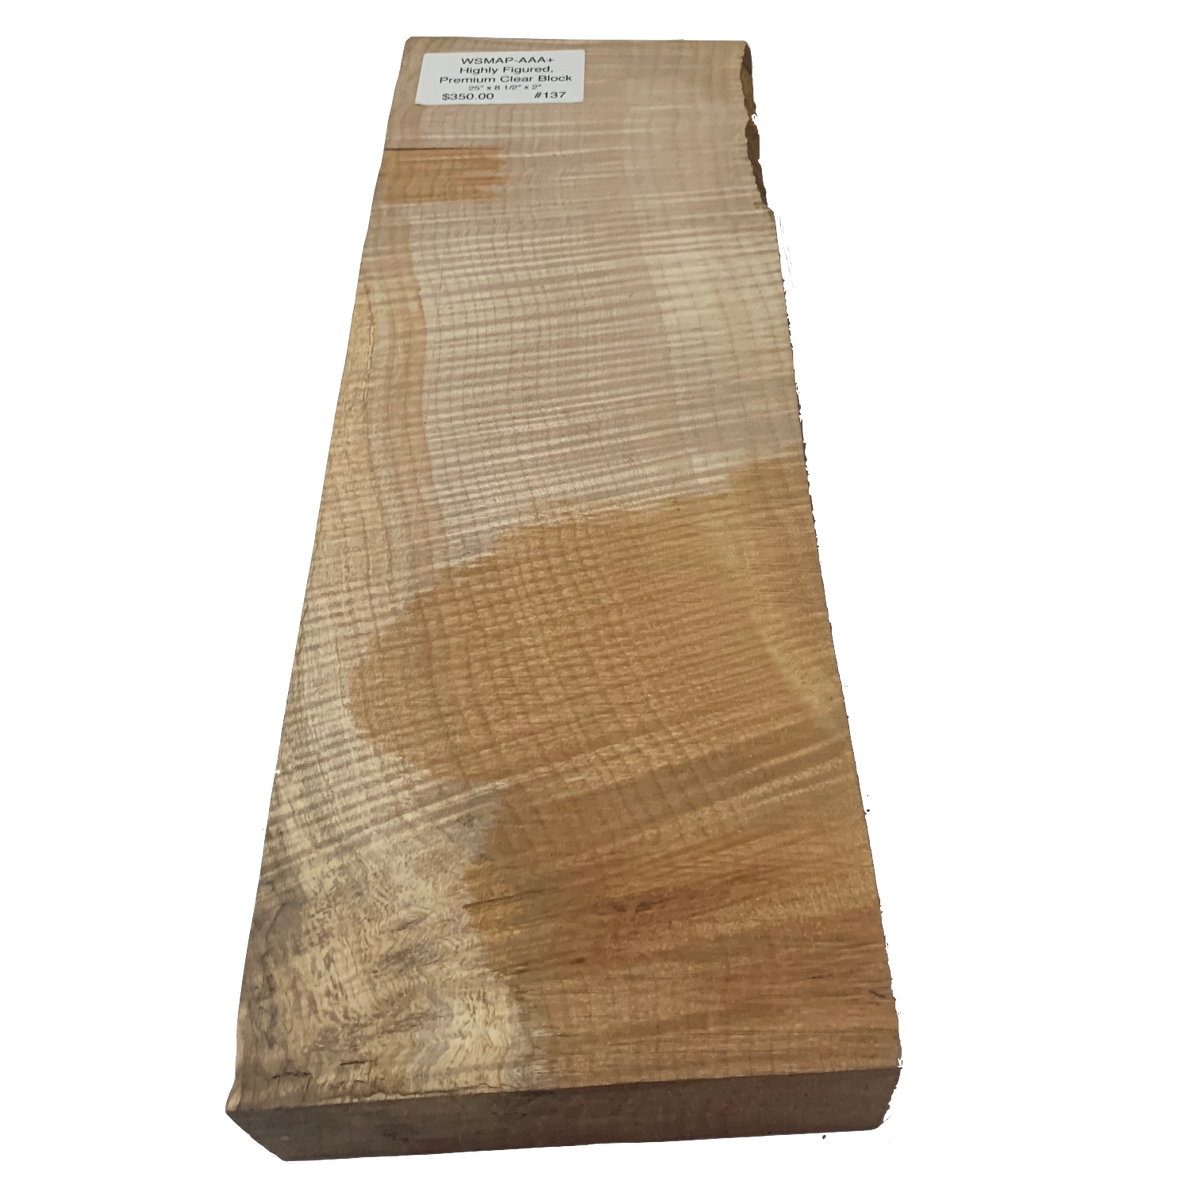 Guitar Body - Quilted Maple - #137